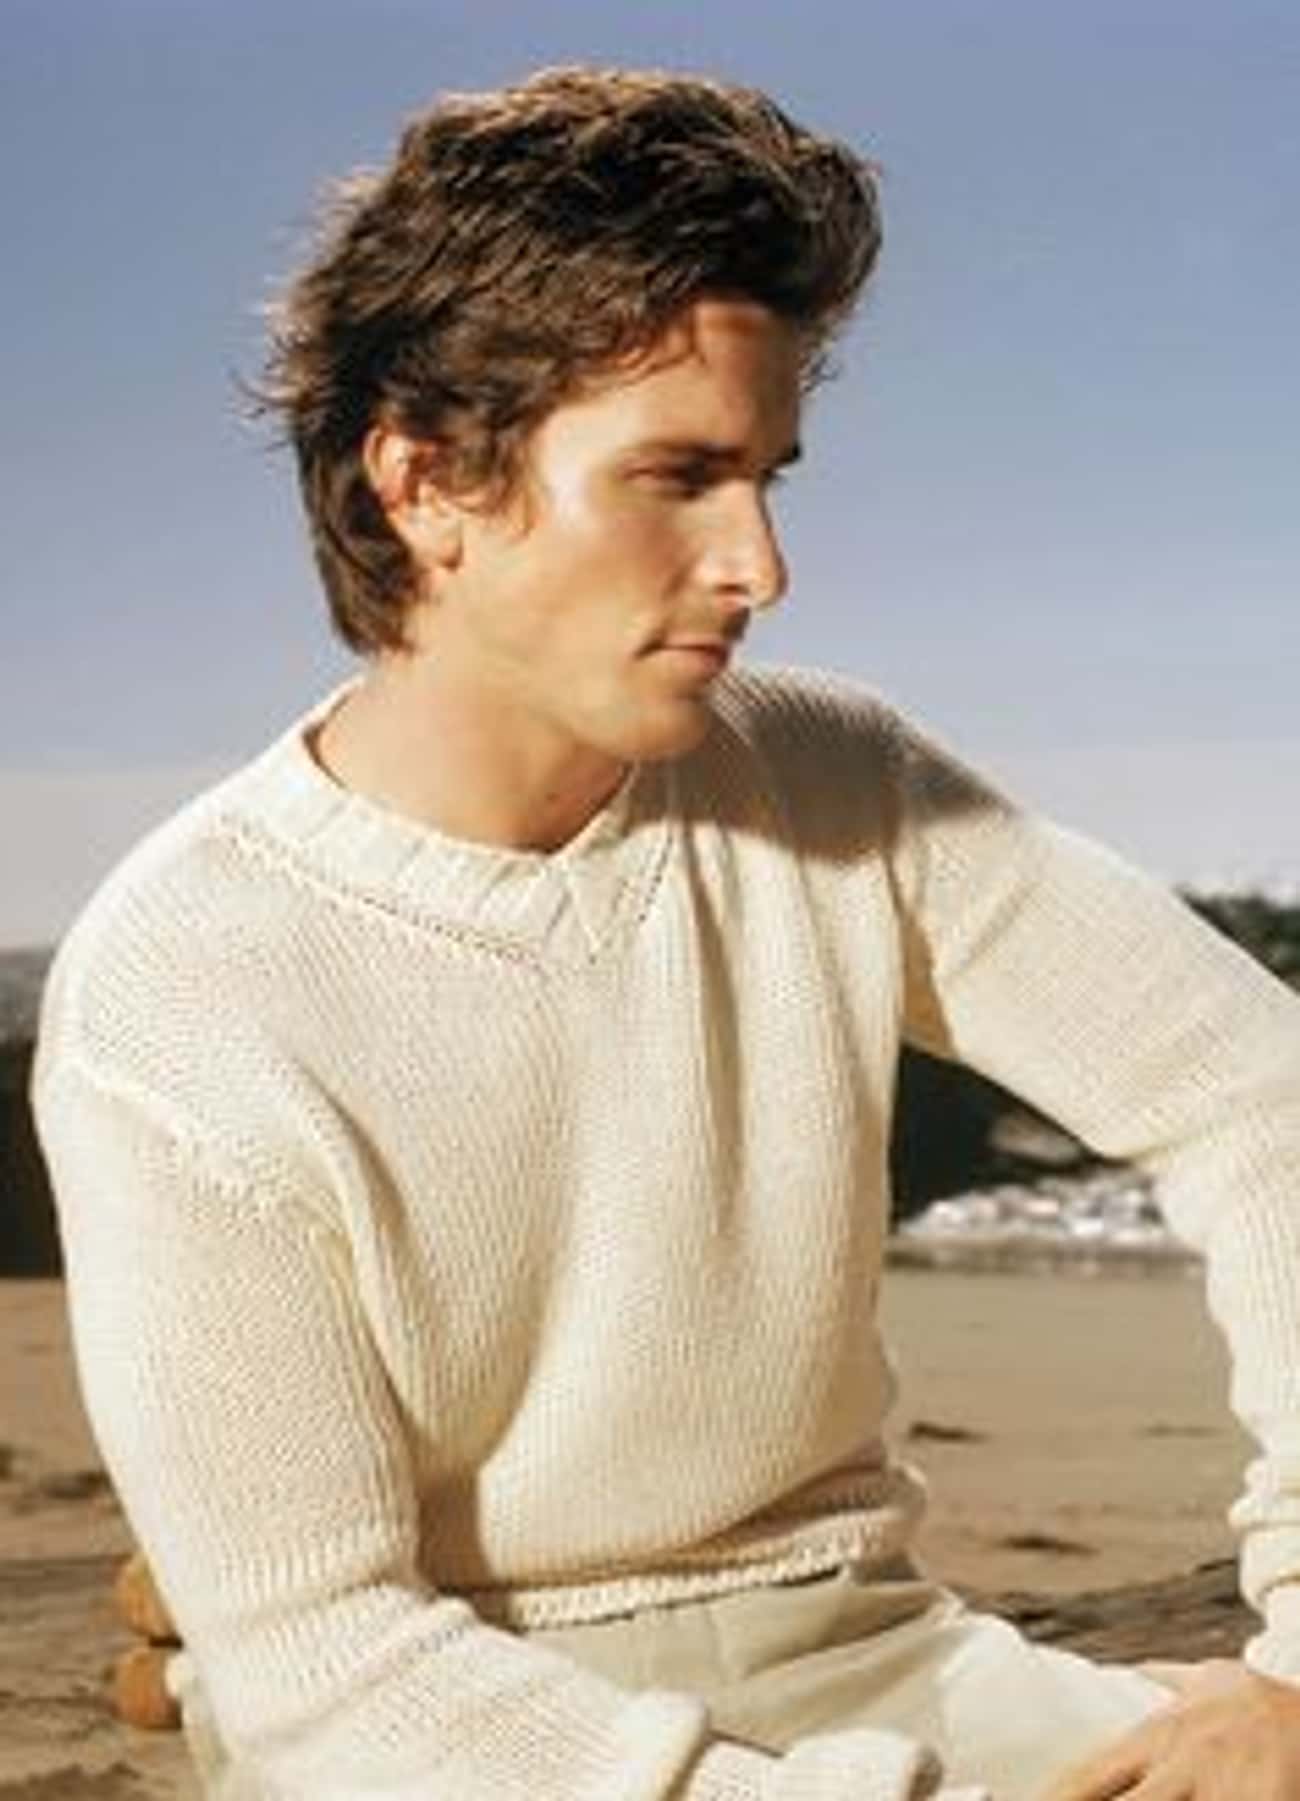 Young Christian Bale in White V-Neck Sweater